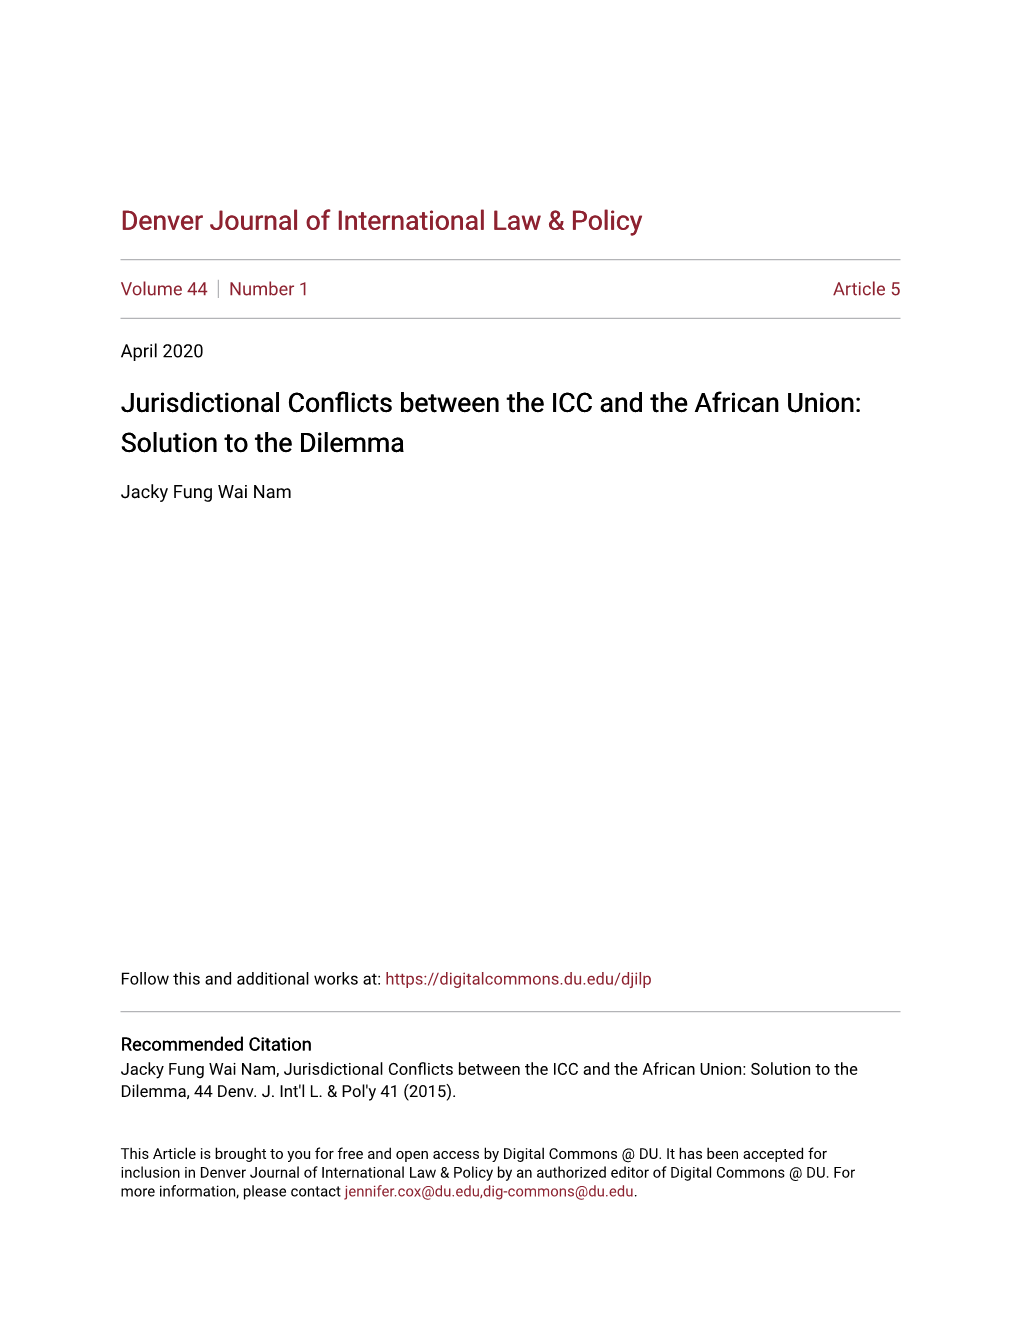 Jurisdictional Conflicts Between the ICC and the African Union: Solution to the Dilemma